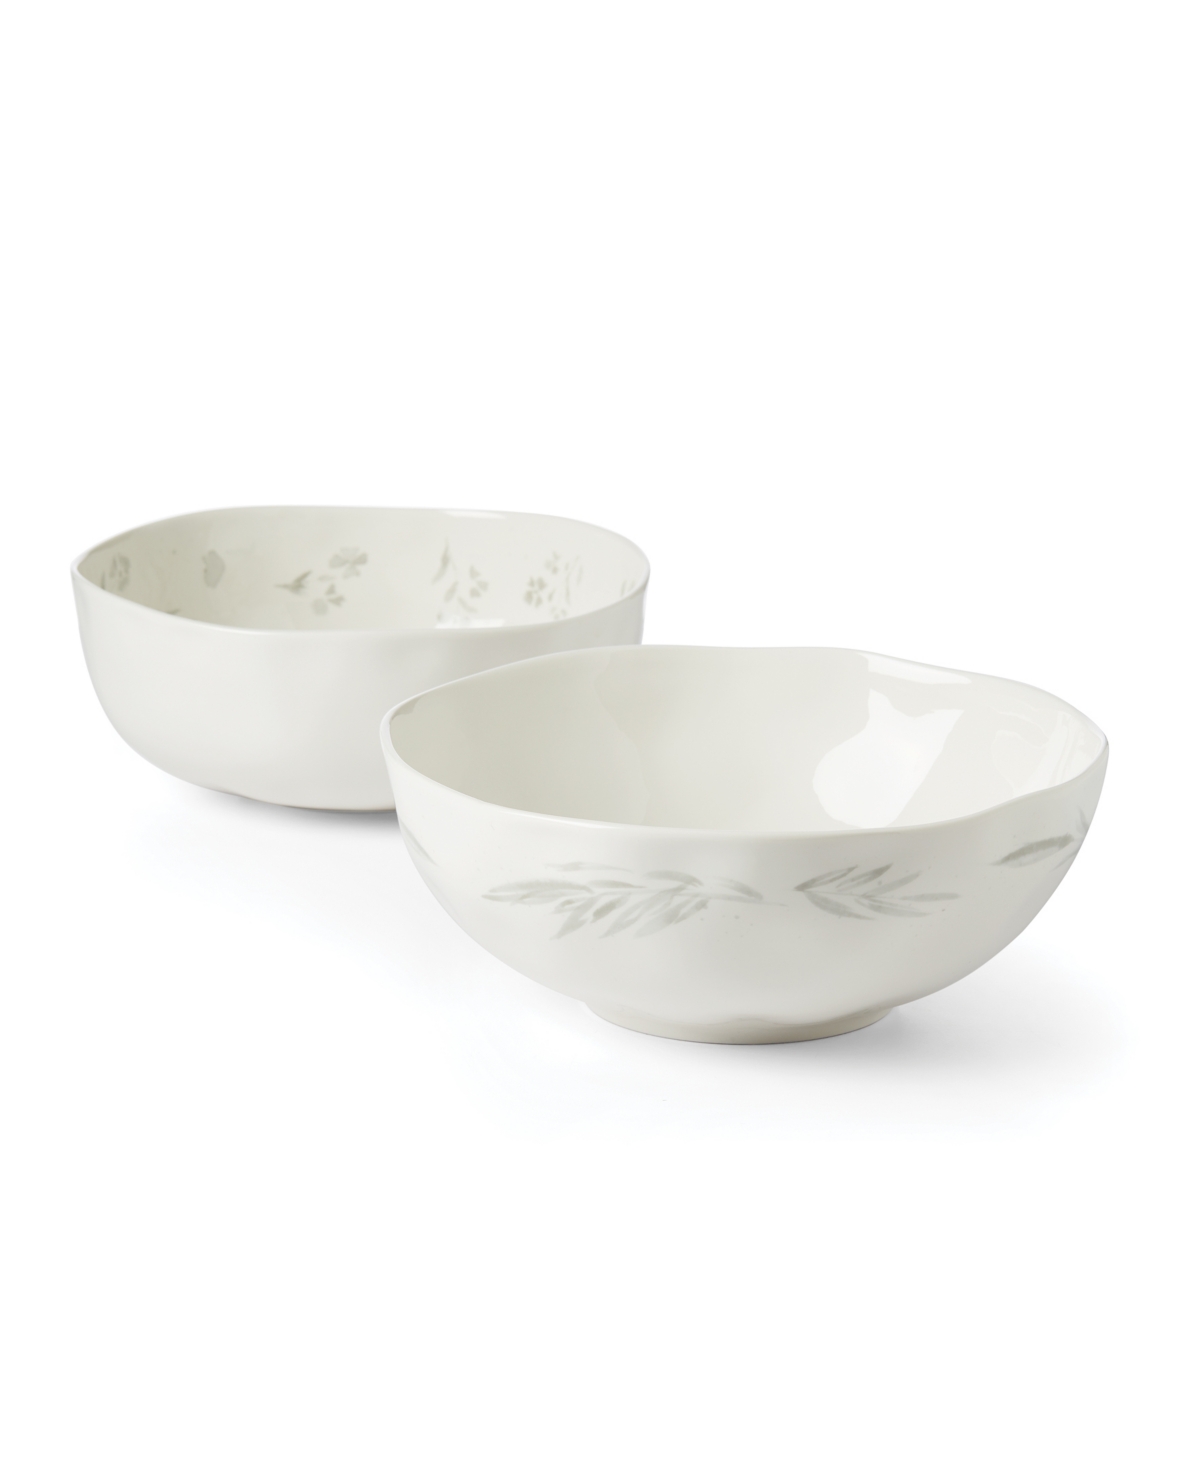 Lenox Oyster Bay Nesting Serving Bowls, Set Of 2 In White